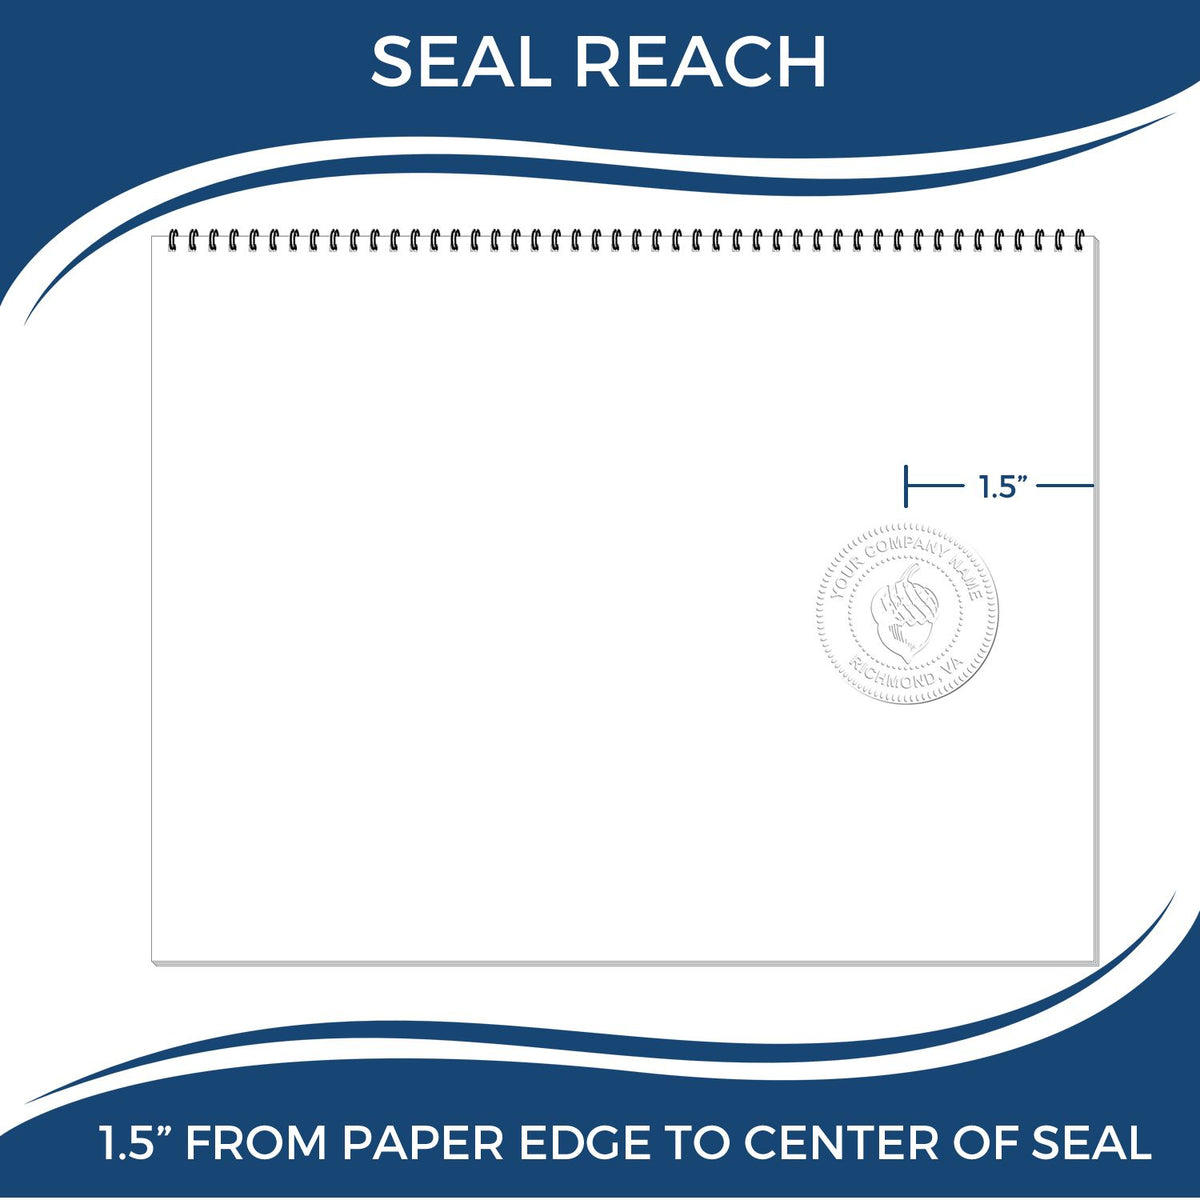 An infographic showing the seal reach which is represented by a ruler and a miniature seal image of the Gift Maryland Engineer Seal